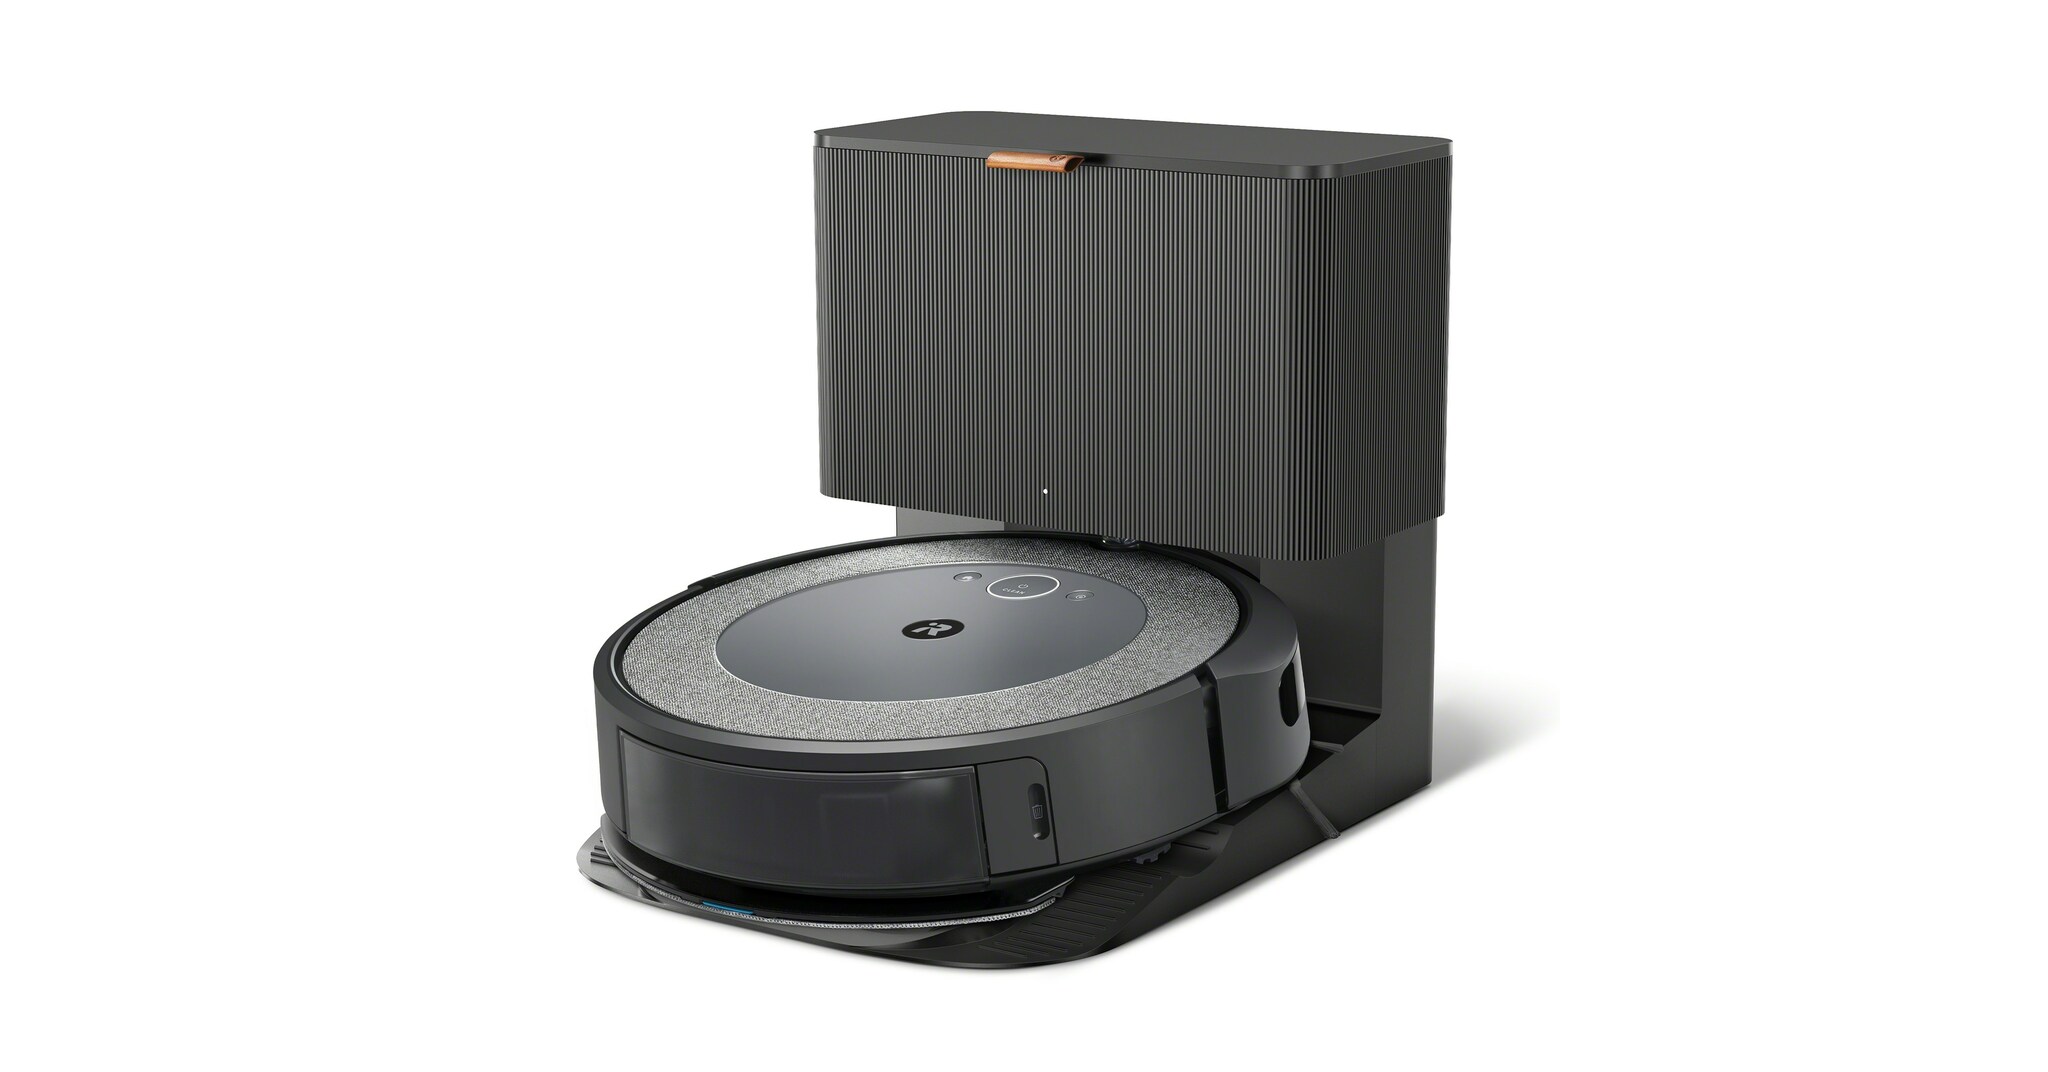 iRobot expands line of 2-in-1 Roomba combos - The Robot Report